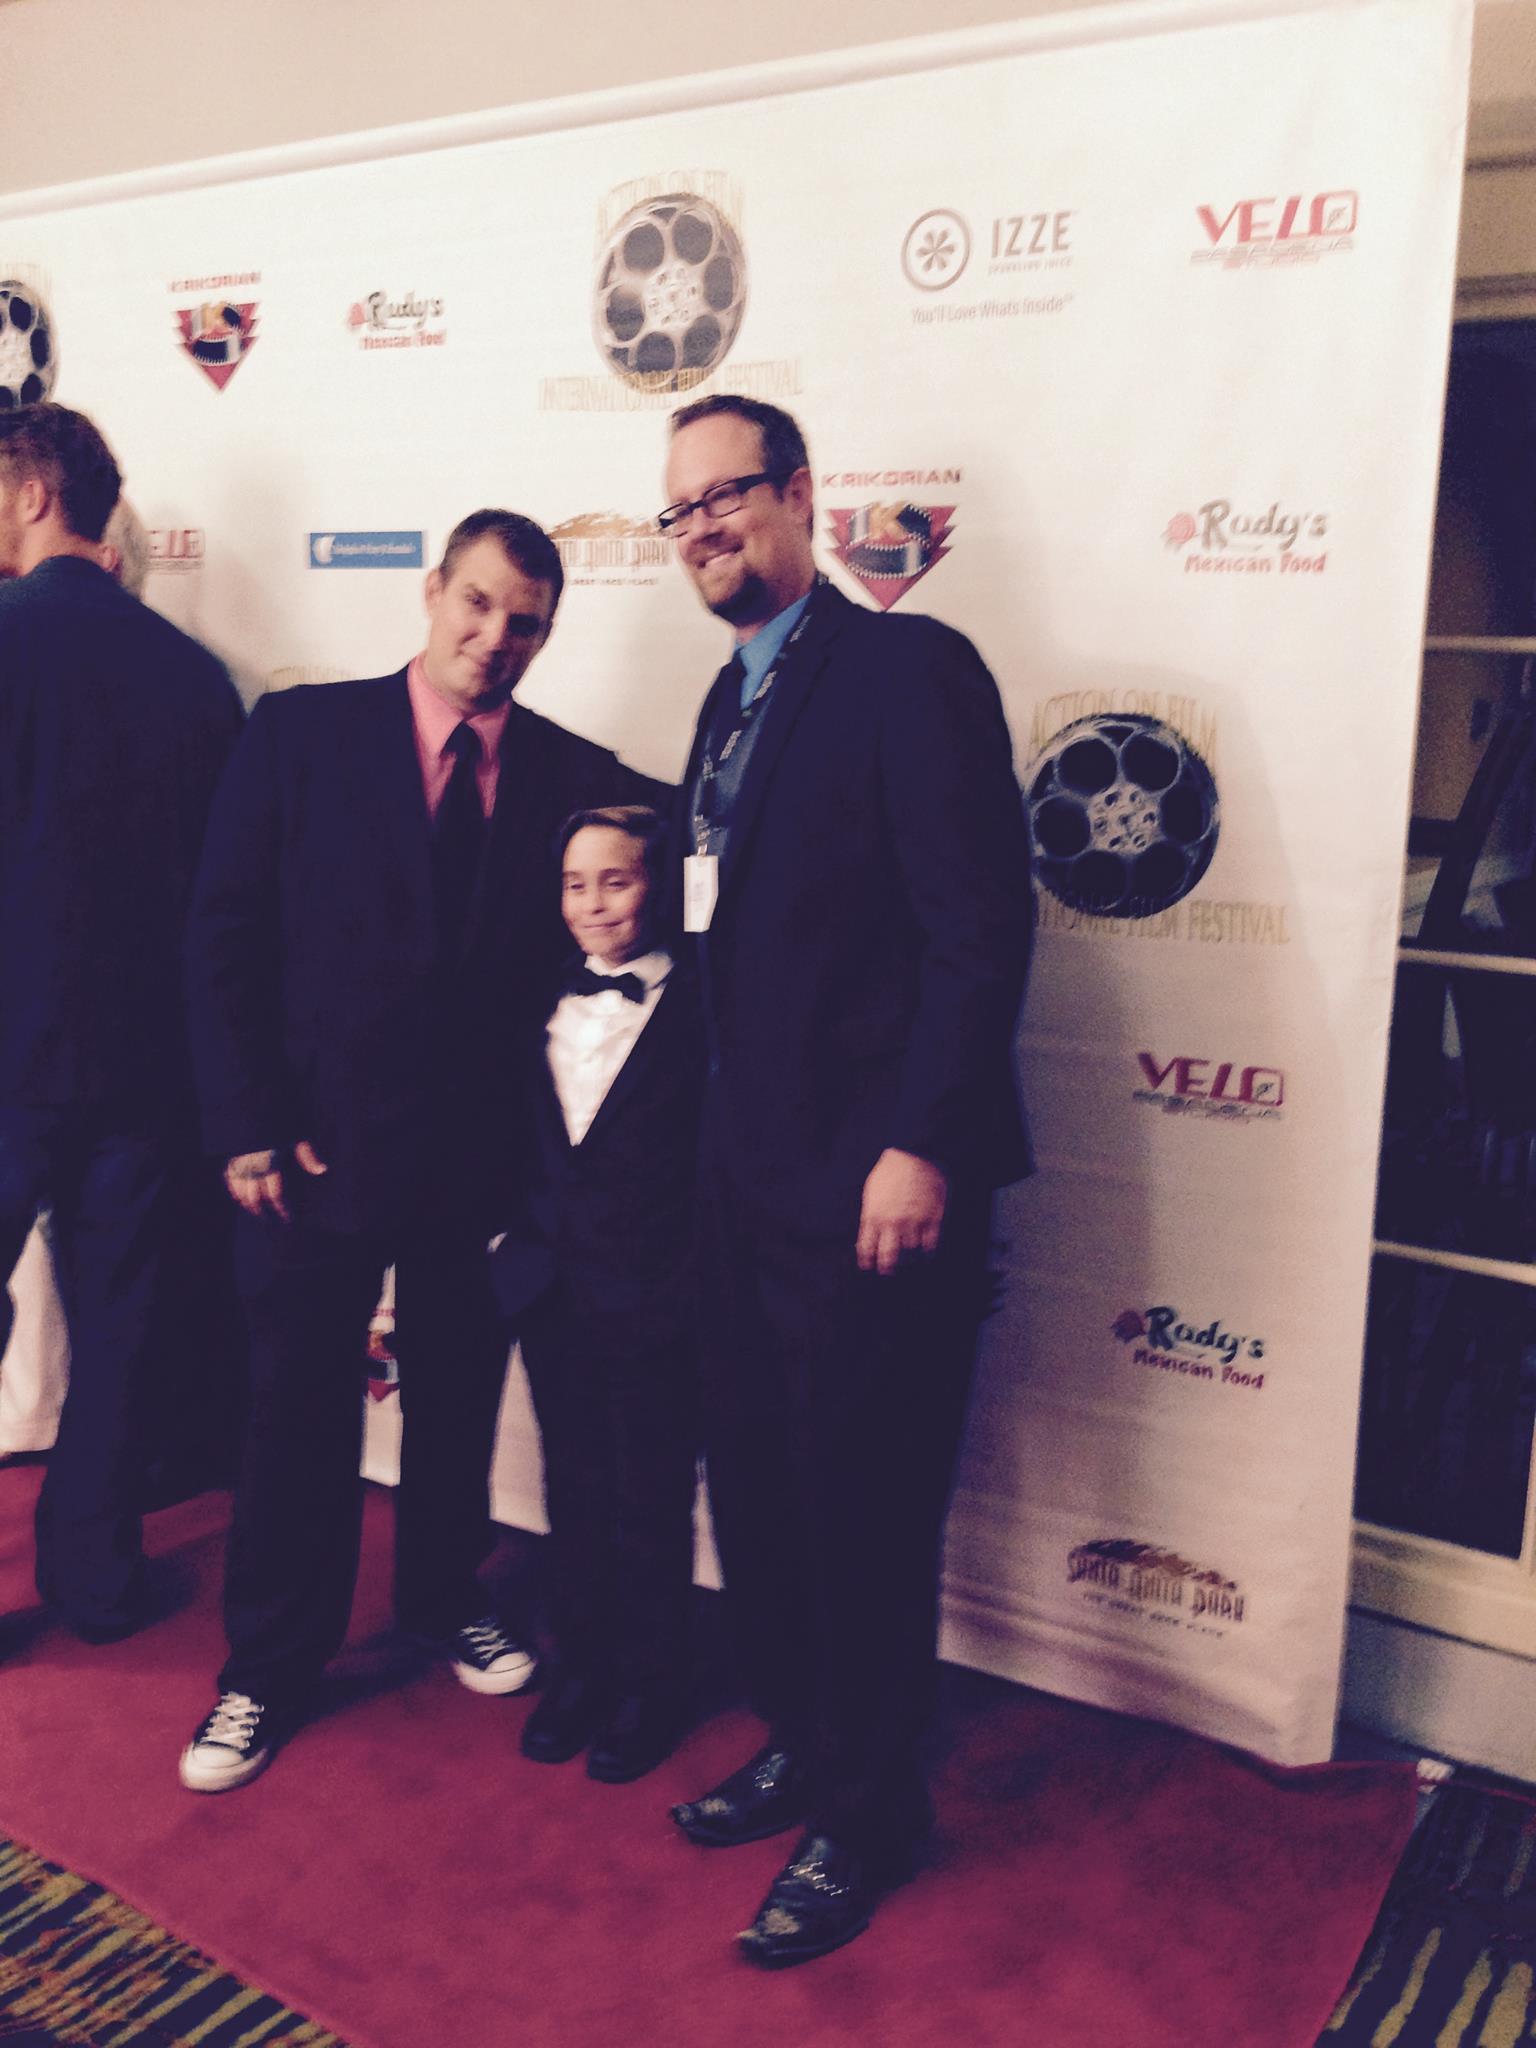 2015 Action on Film red carpet for The Astronaut, with producer Matt Sconce and actor Aidan Aaron.